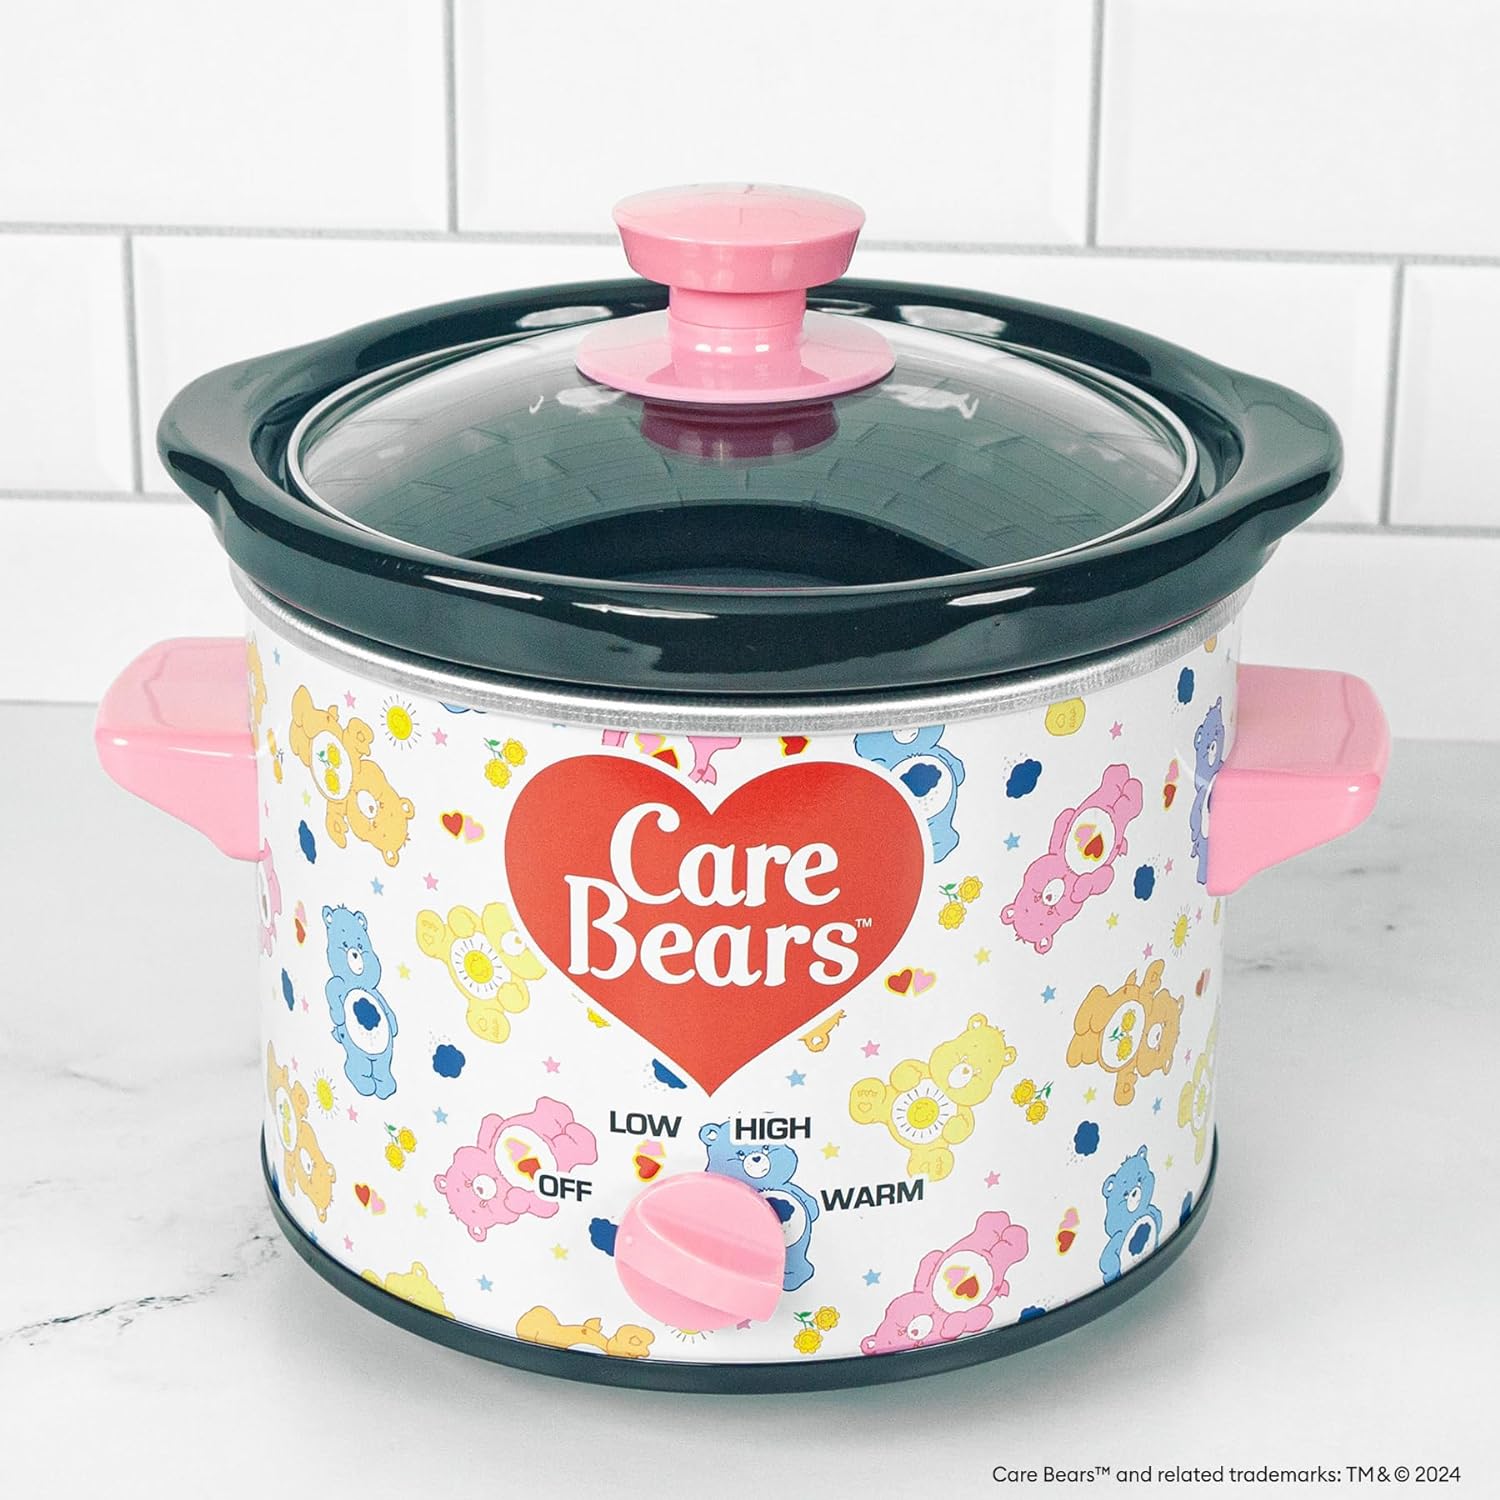 Uncanny Brands Care Bears 2qt Slow Cooker - Cook With Your Favorite Care Bear Characters